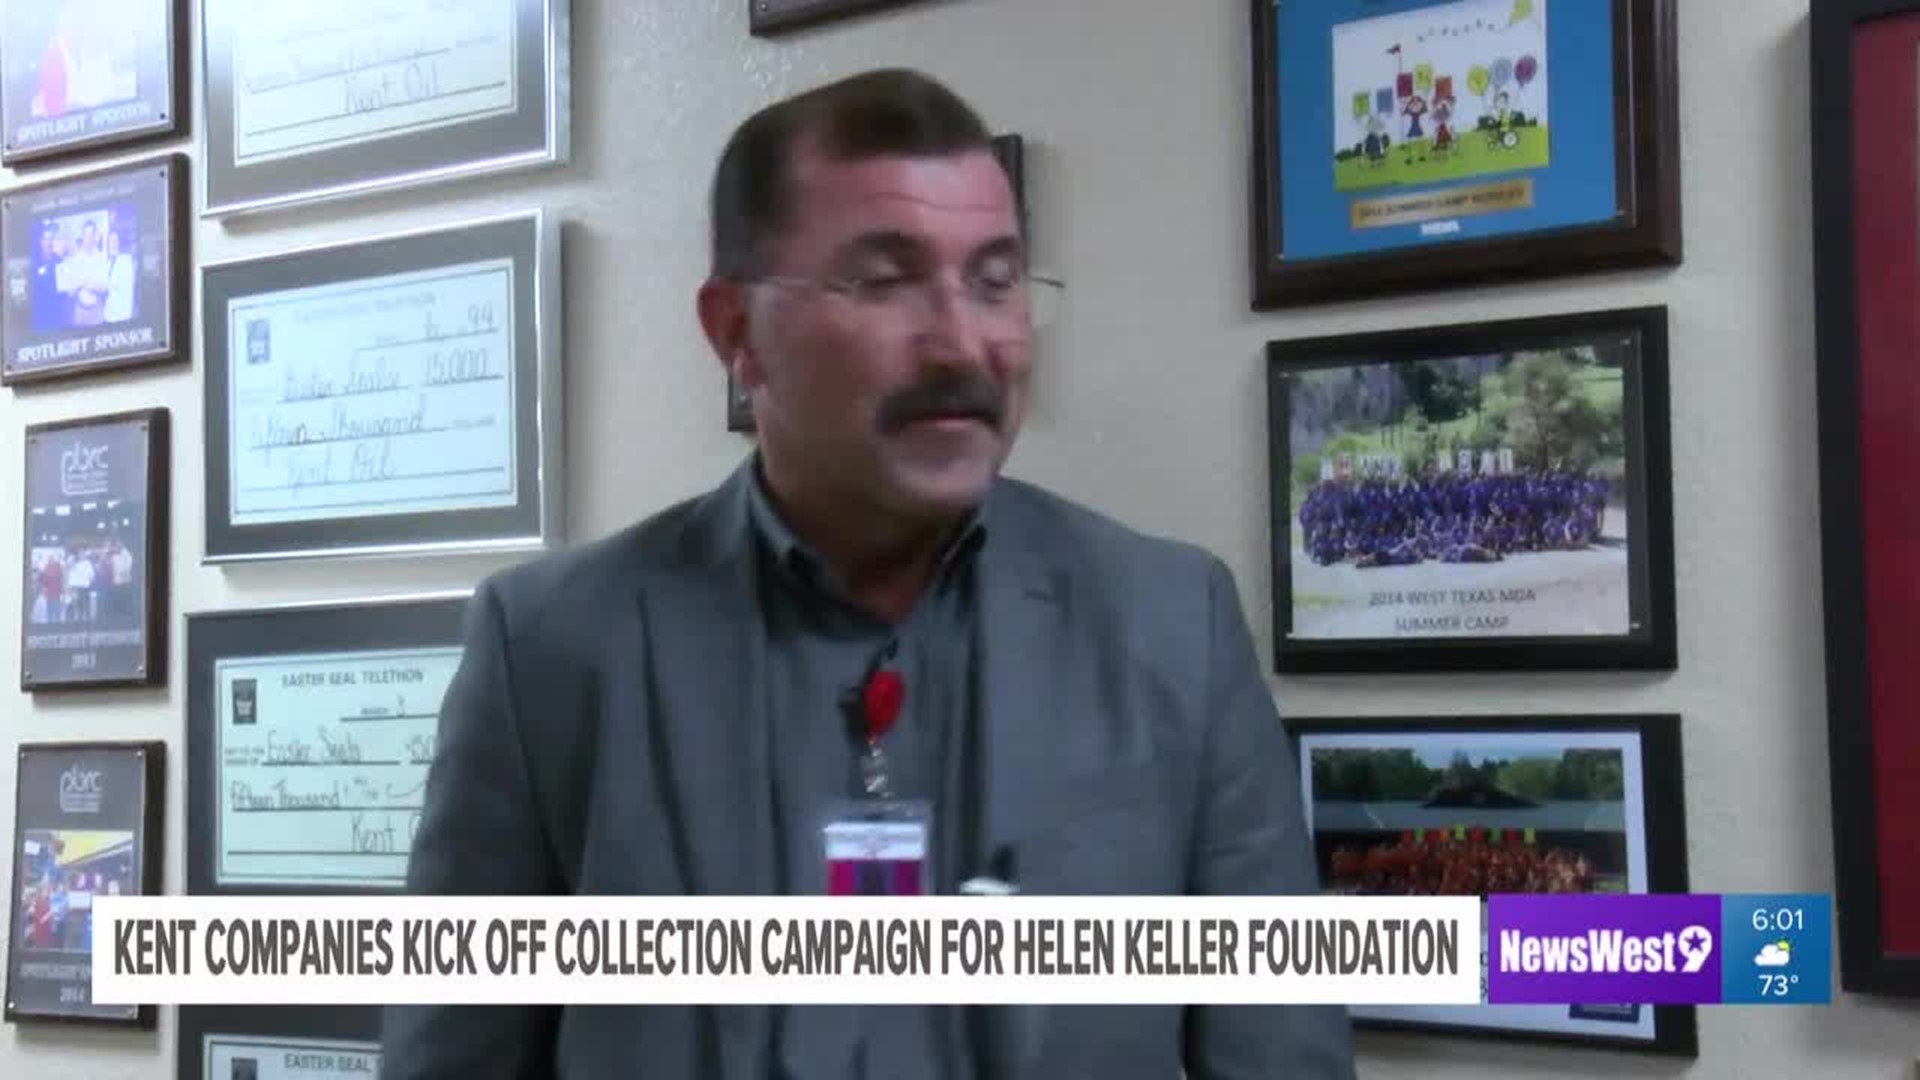 Kent Company partners with Helen Keller Foundation to help those with vision impairment